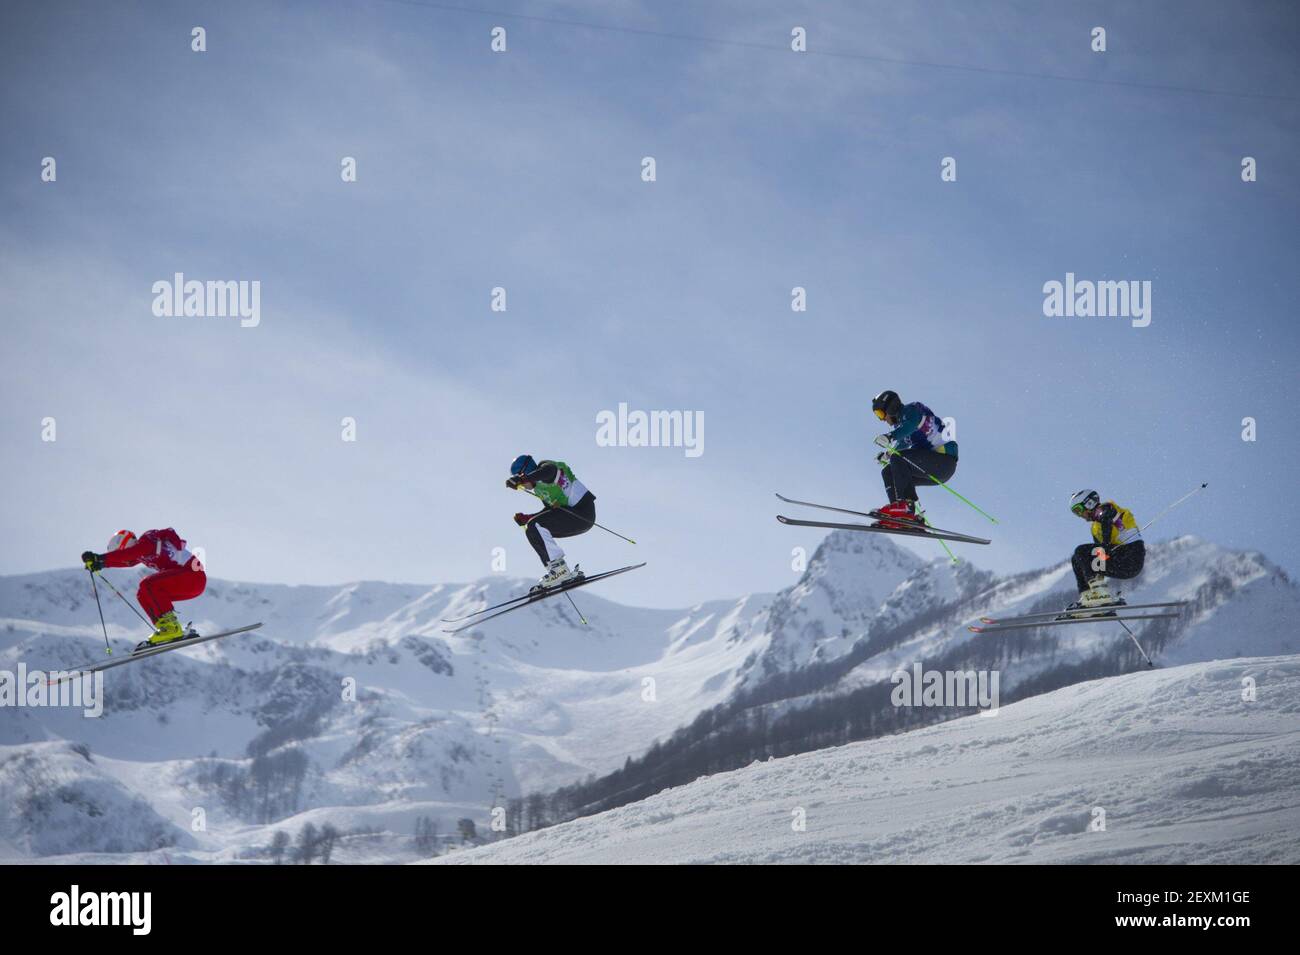 Left to right, Armin Niederer of Switzerland, Jouni Pellinen of Finland, Scott Kneller of Australia and Thomas Borge Lie of Norway clear a jump during the men's ski cross at the Winter Olympics in Sochi, Russia, on Thursday, Feb. 20, 2014. (Photo by Mark Reis/Colorado Springs Gazette/MCT/Sipa USA) Stock Photo